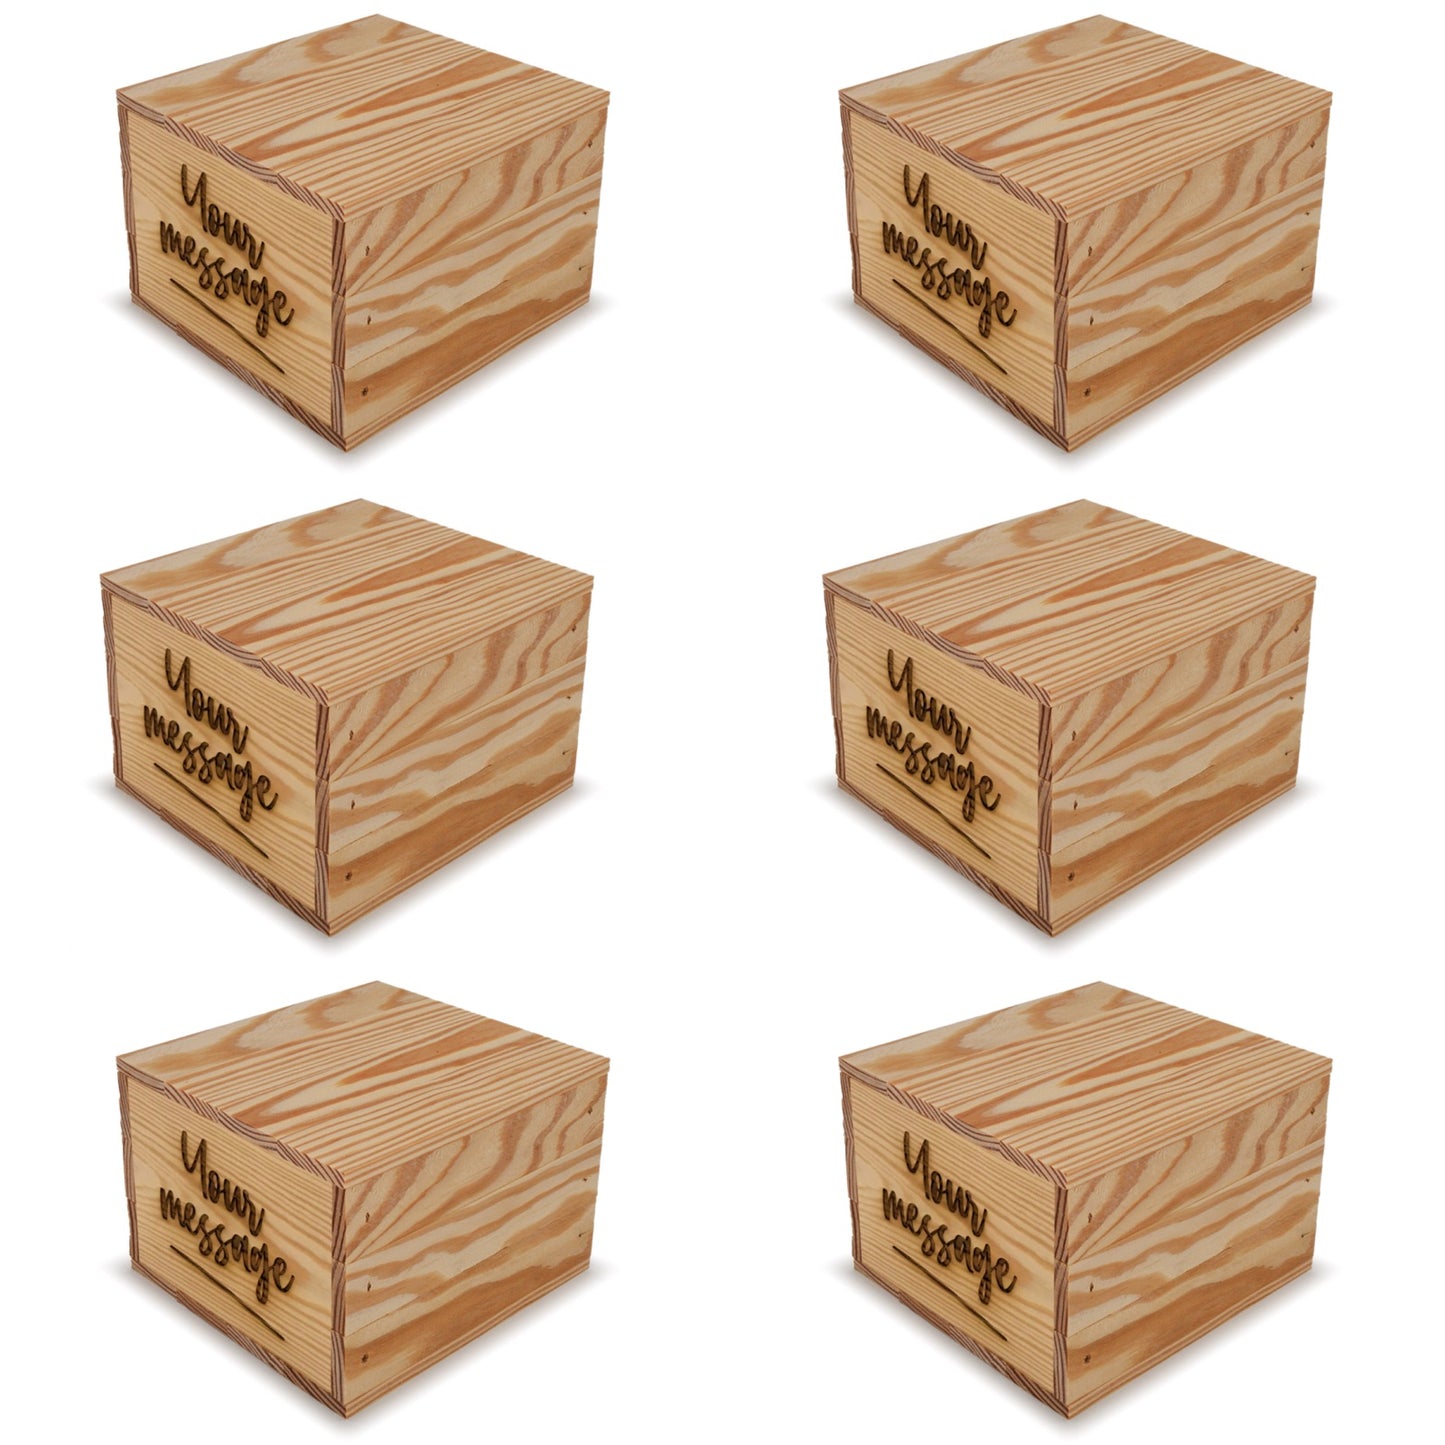 6 Small wooden crates with lid and custom message 6x6.25x5.25